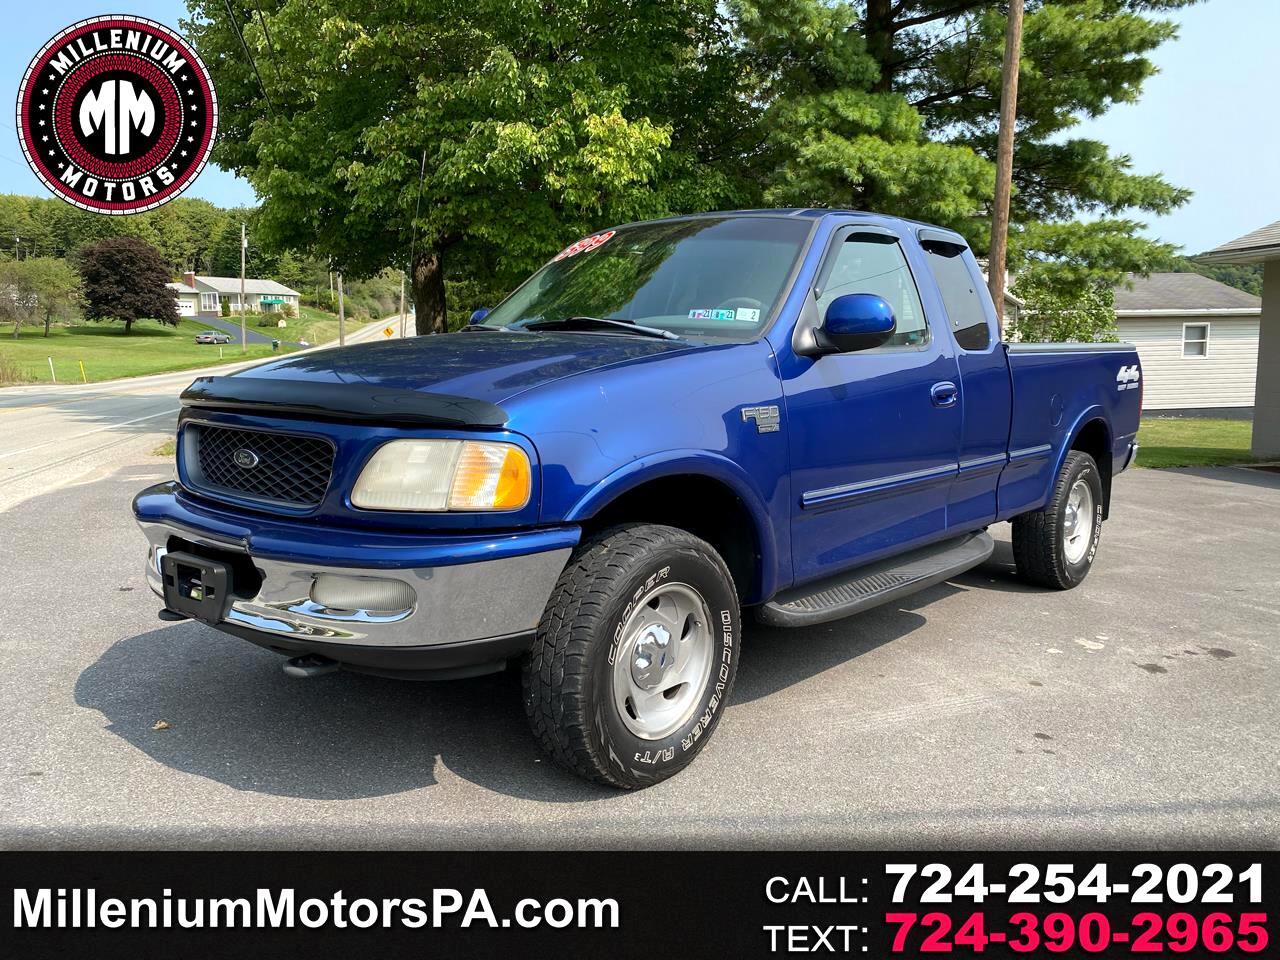 Used 1998 Ford F-150 Supercab 139" 4WD for Sale in Marion Center PA 1998 Ford F150 4.6 Towing Capacity